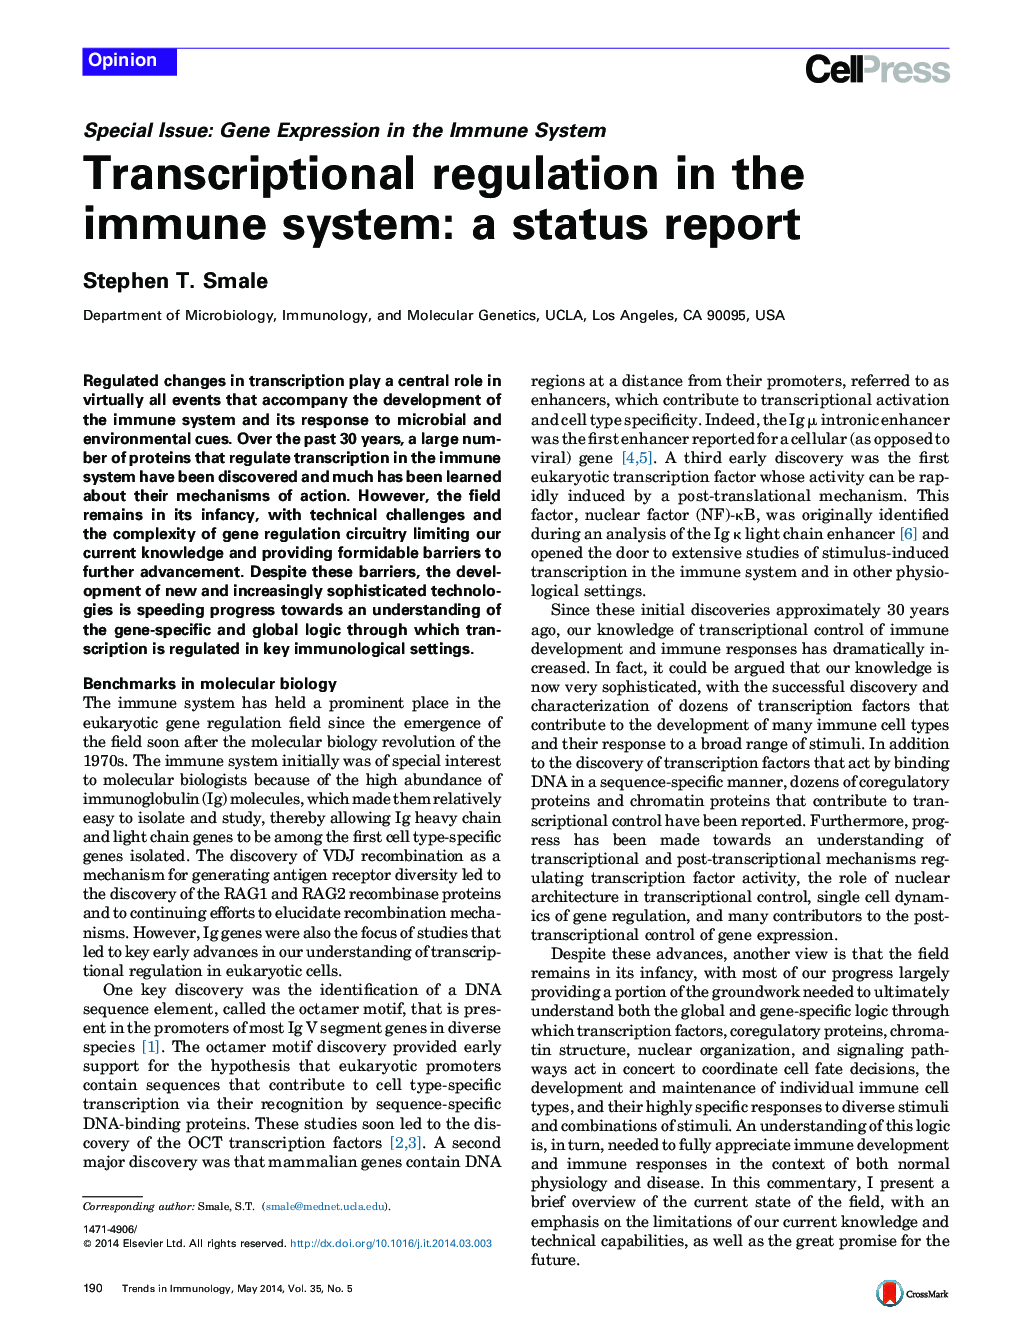 Transcriptional regulation in the immune system: a status report